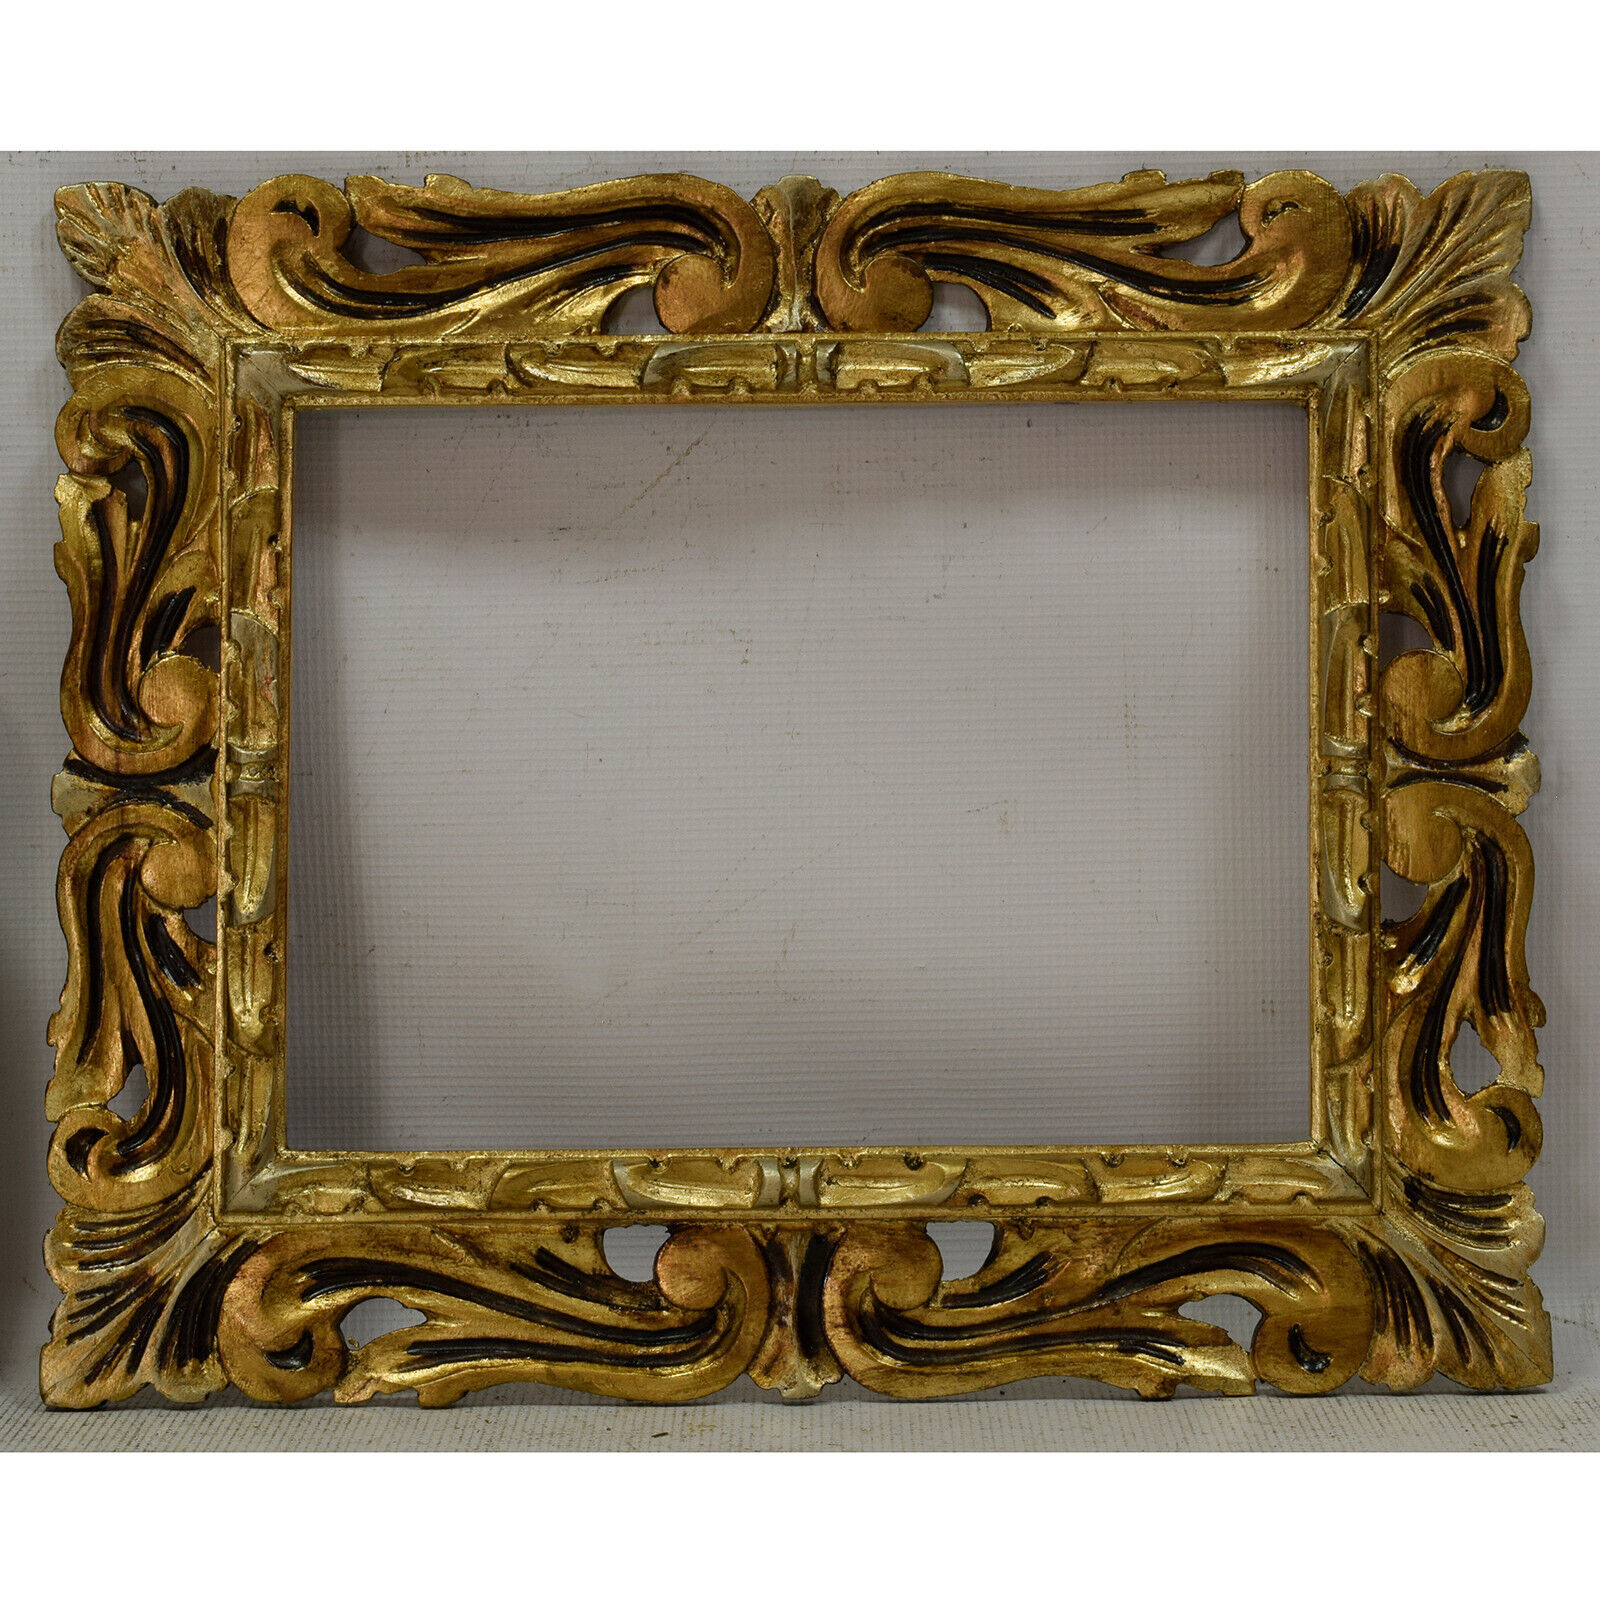 Ca 1900 Old wooden openwork frame with metal leaf Internal: 12x8,6 in